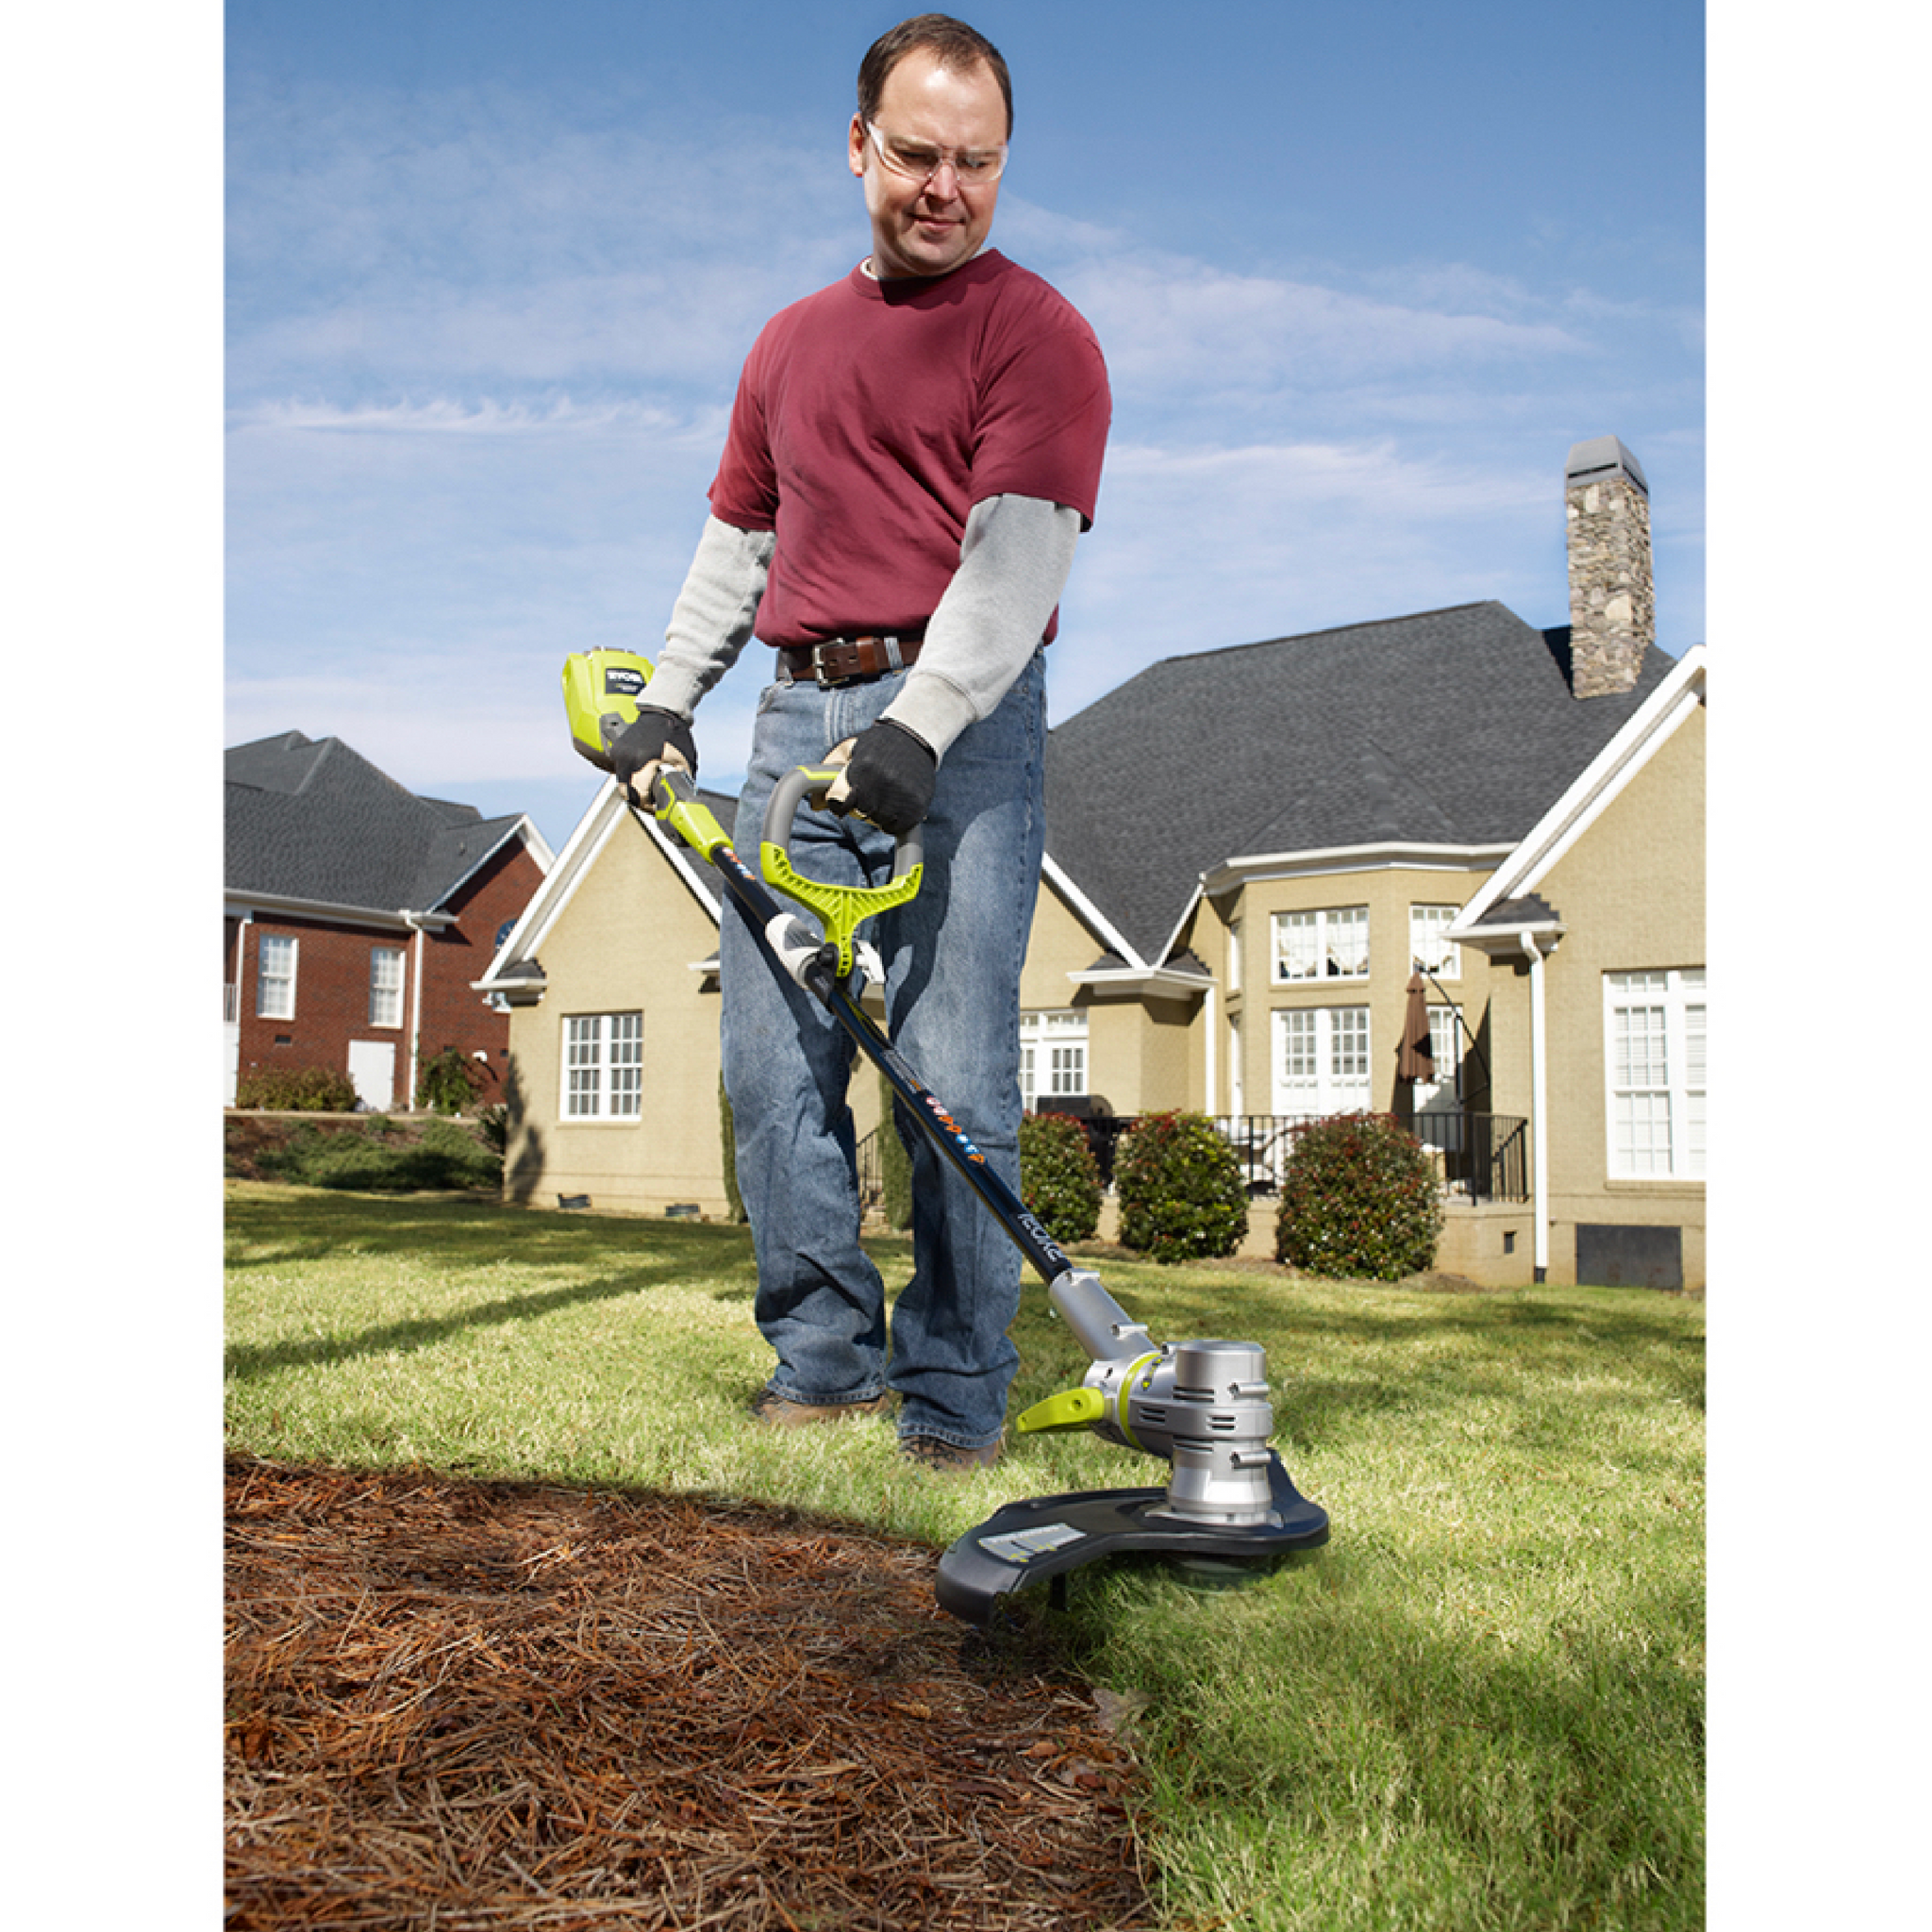 40-Volt Lithium-Ion Cordless Battery String Trimmer (Tool Only) – Ryobi  Deal Finders